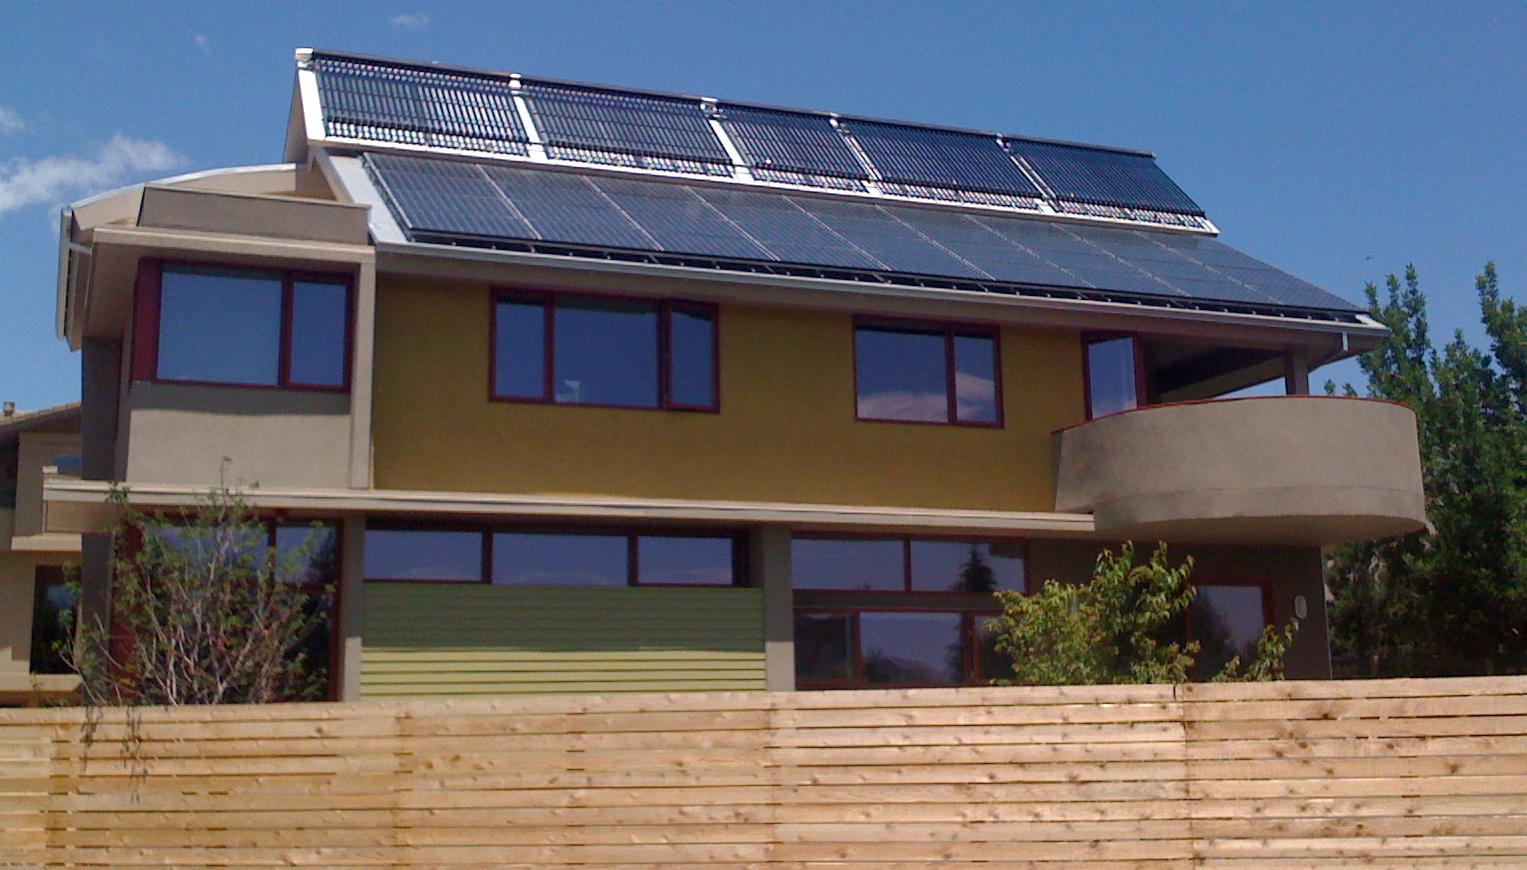 Uses of Solar Energy in Home